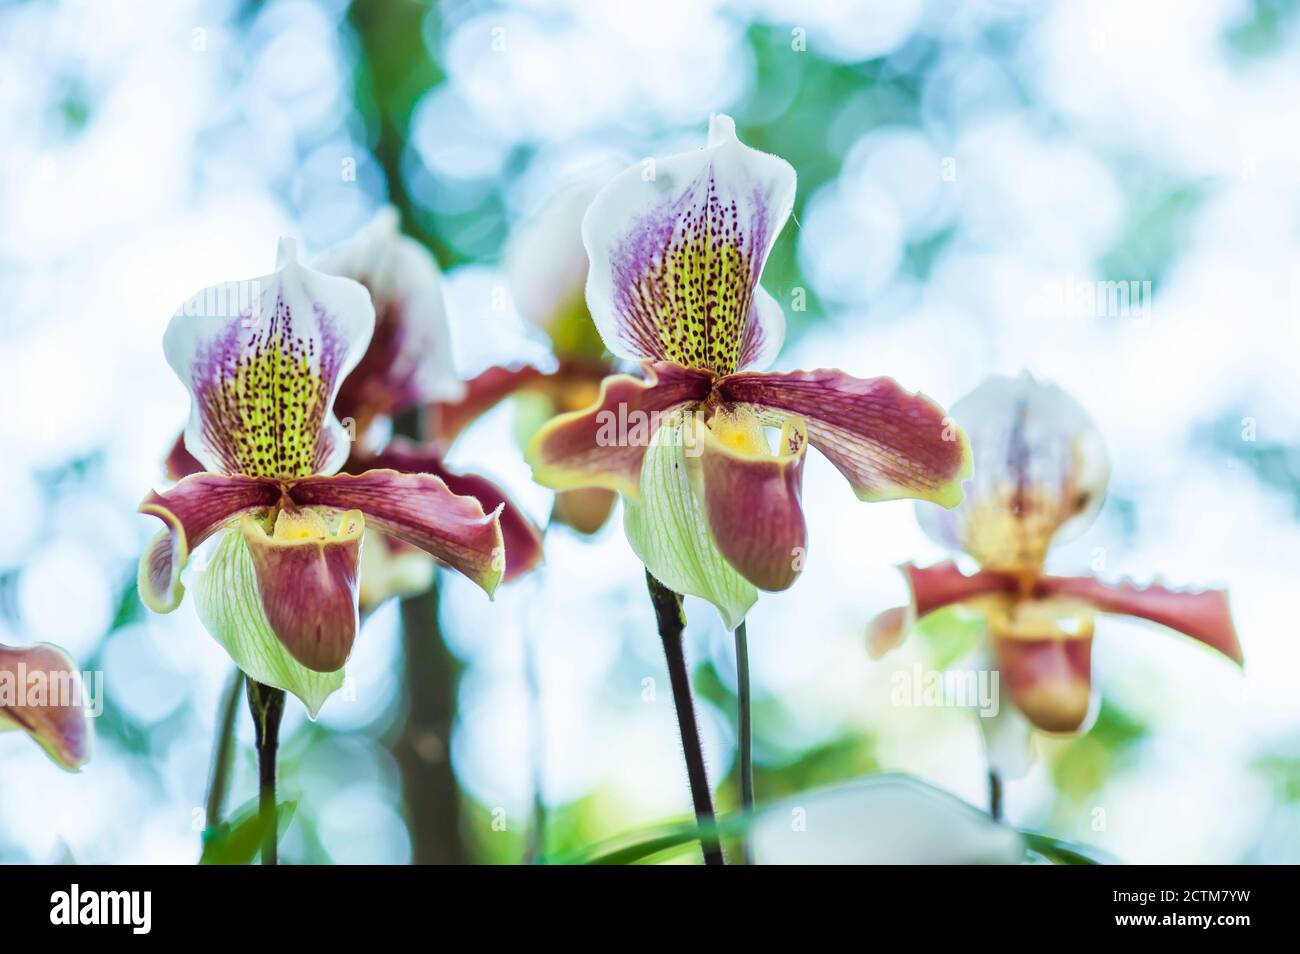 Close-up of Paphiopedilum appletonianum (Gower) Rolfe orchid flowers in full bloom on natural blurred in the background. Stock Photo